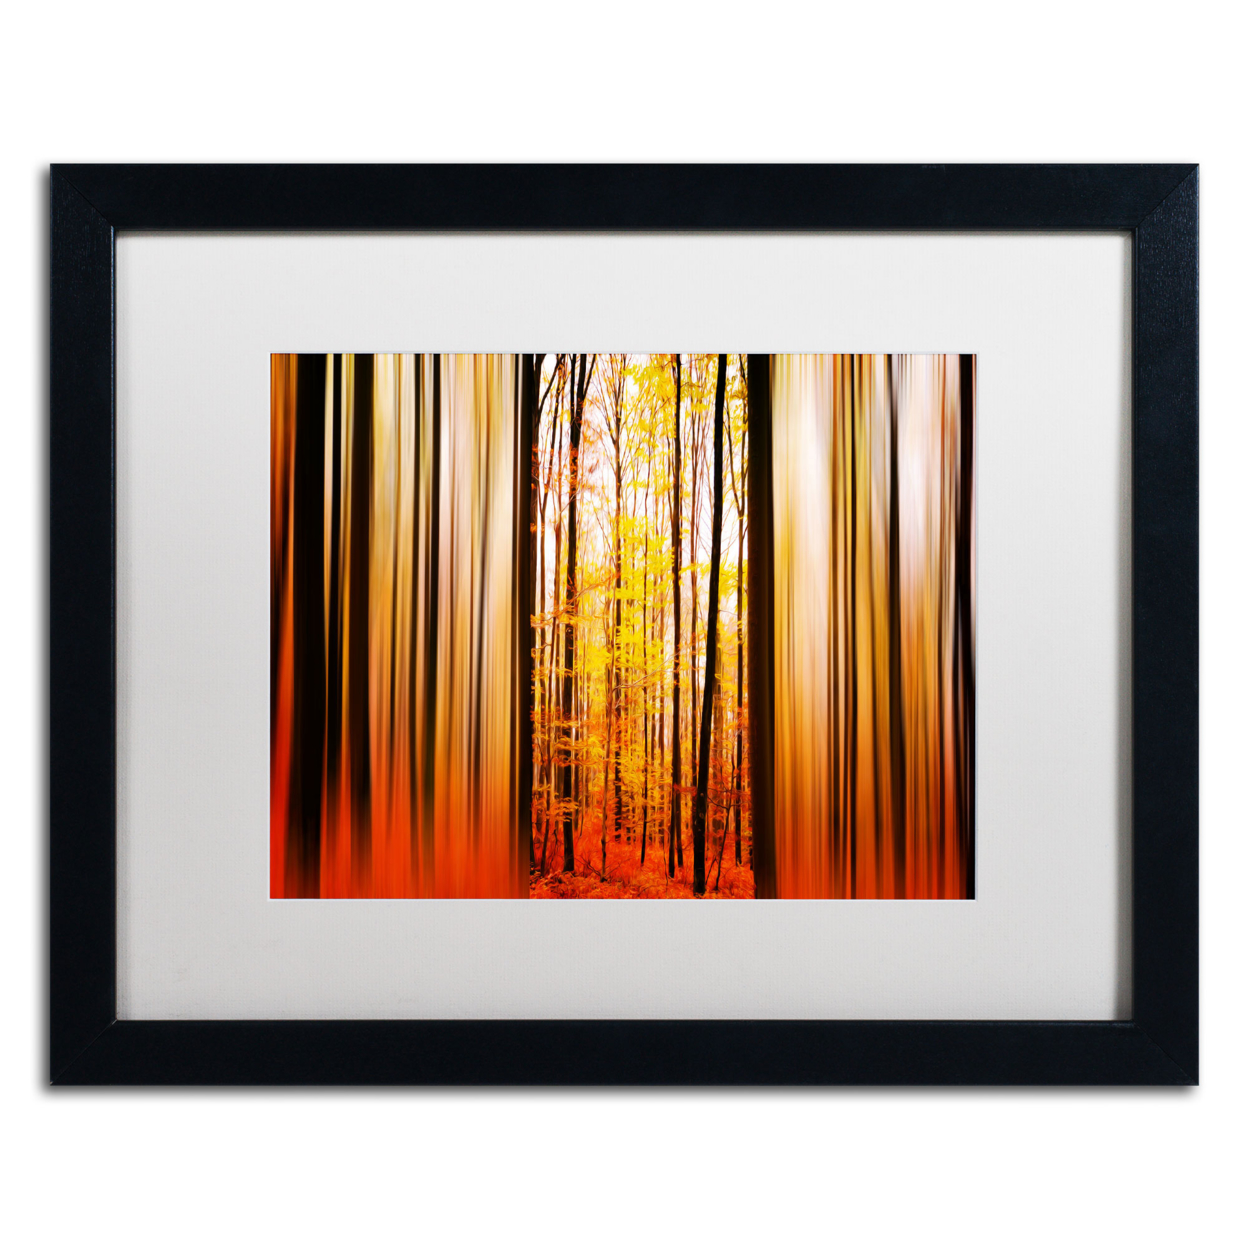 Philippe Sainte-Laudy 'Excited Oxygen' Black Wooden Framed Art 18 X 22 Inches